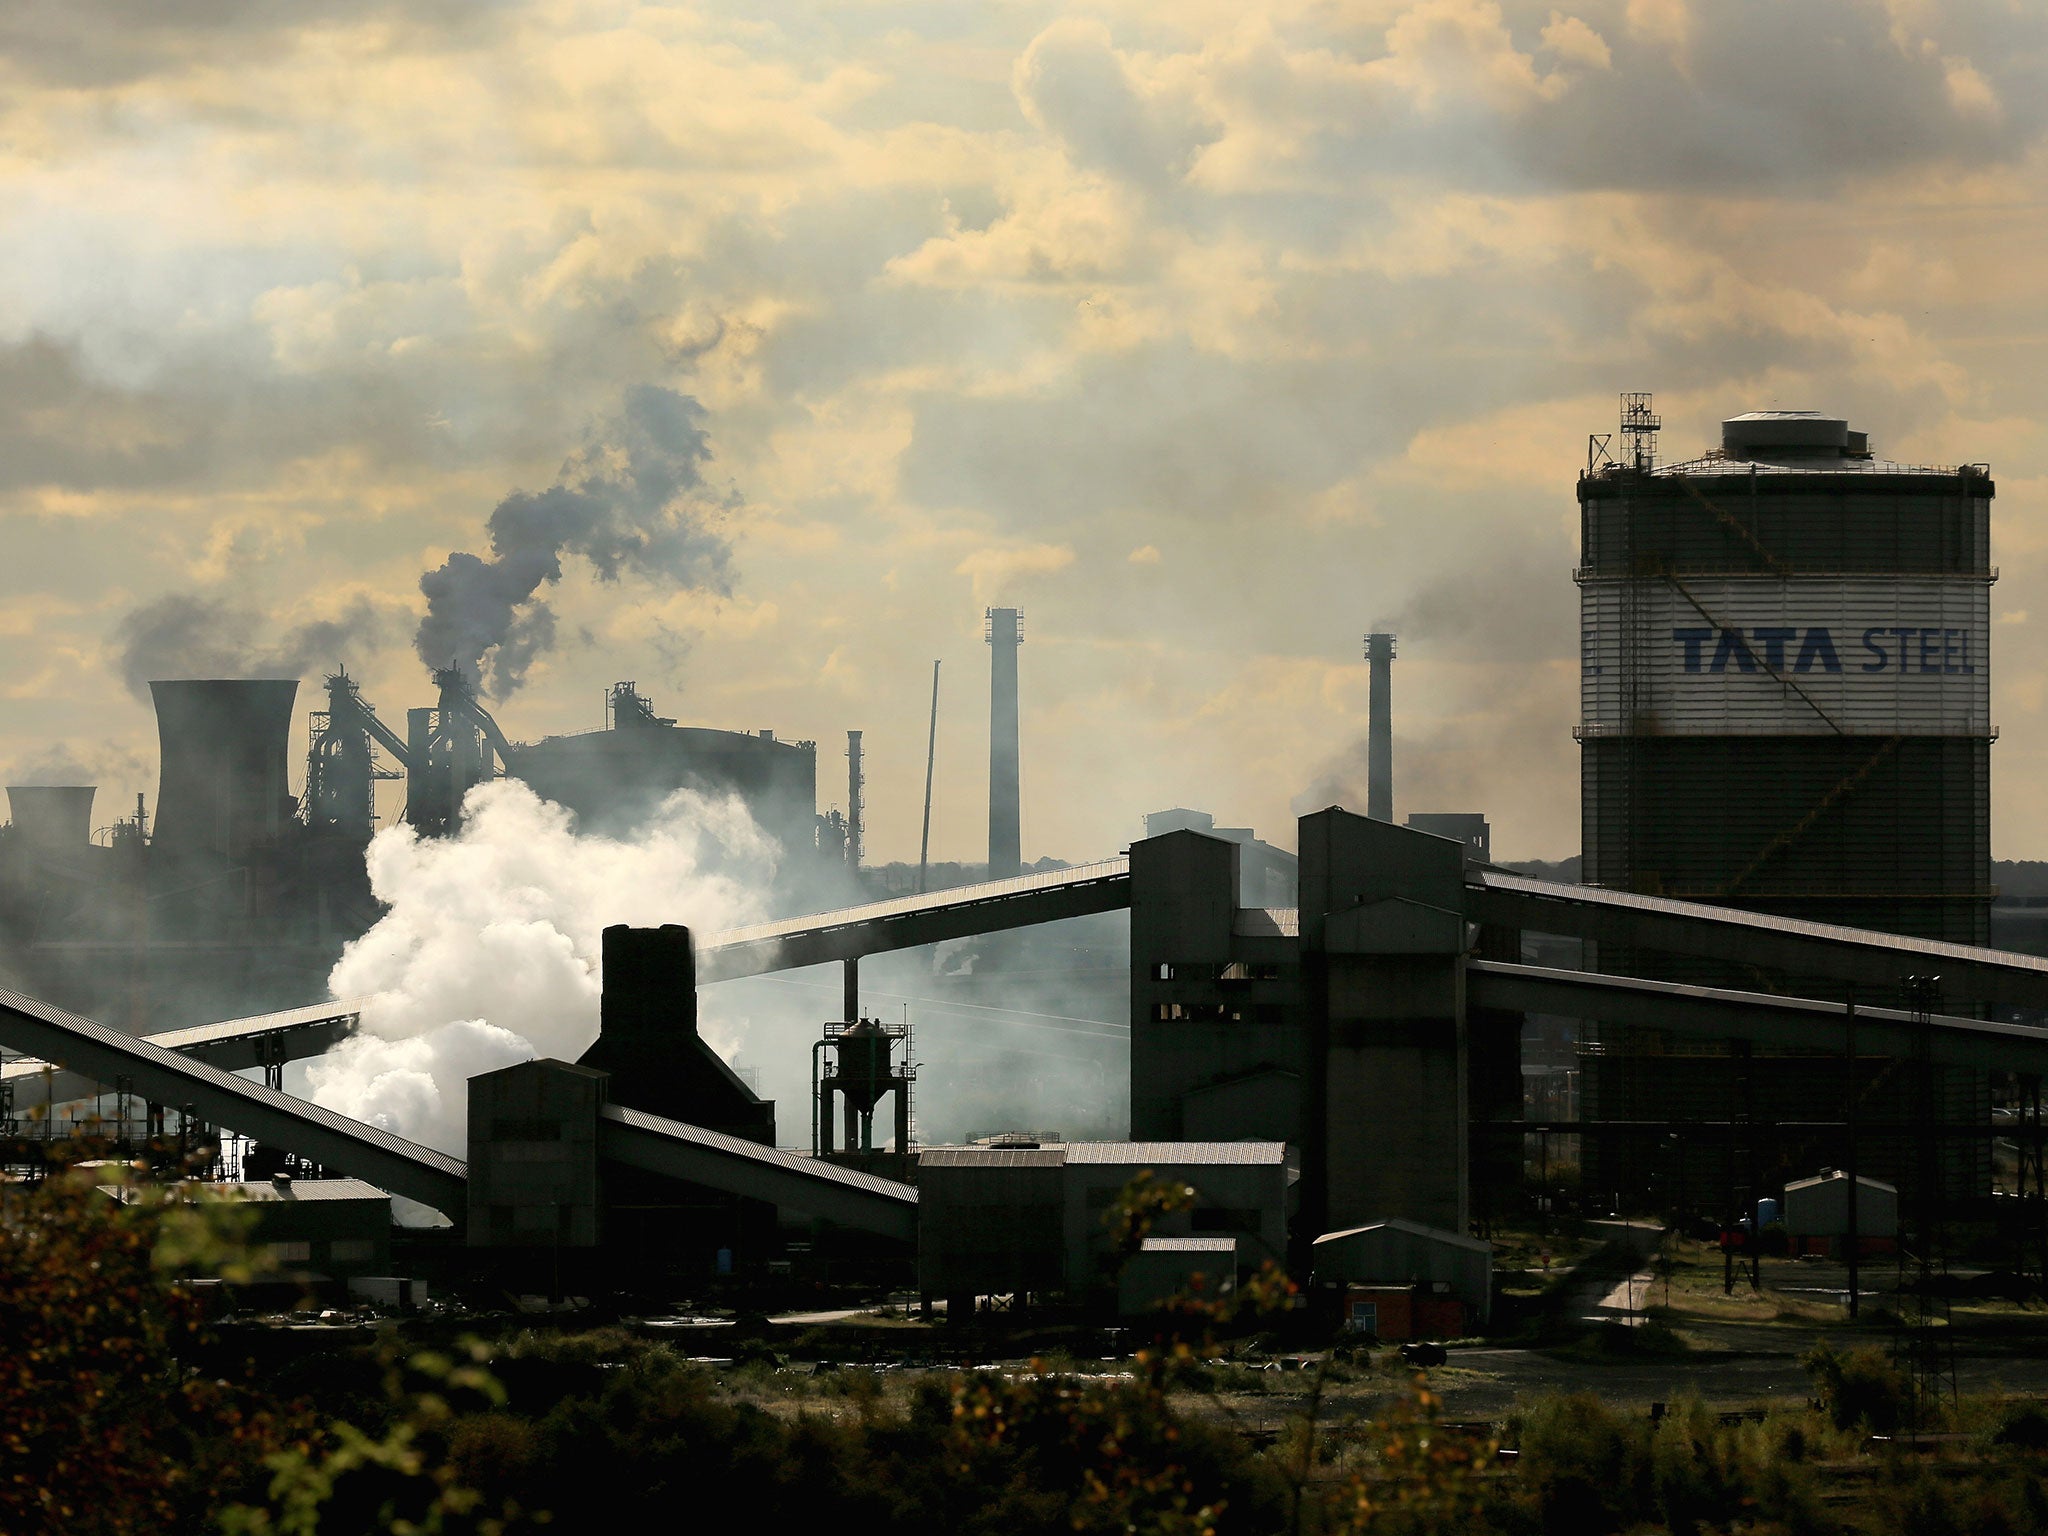 A view of the Tata Steel processing plant at Scunthorpe (Christopher Furlong/Getty Images)